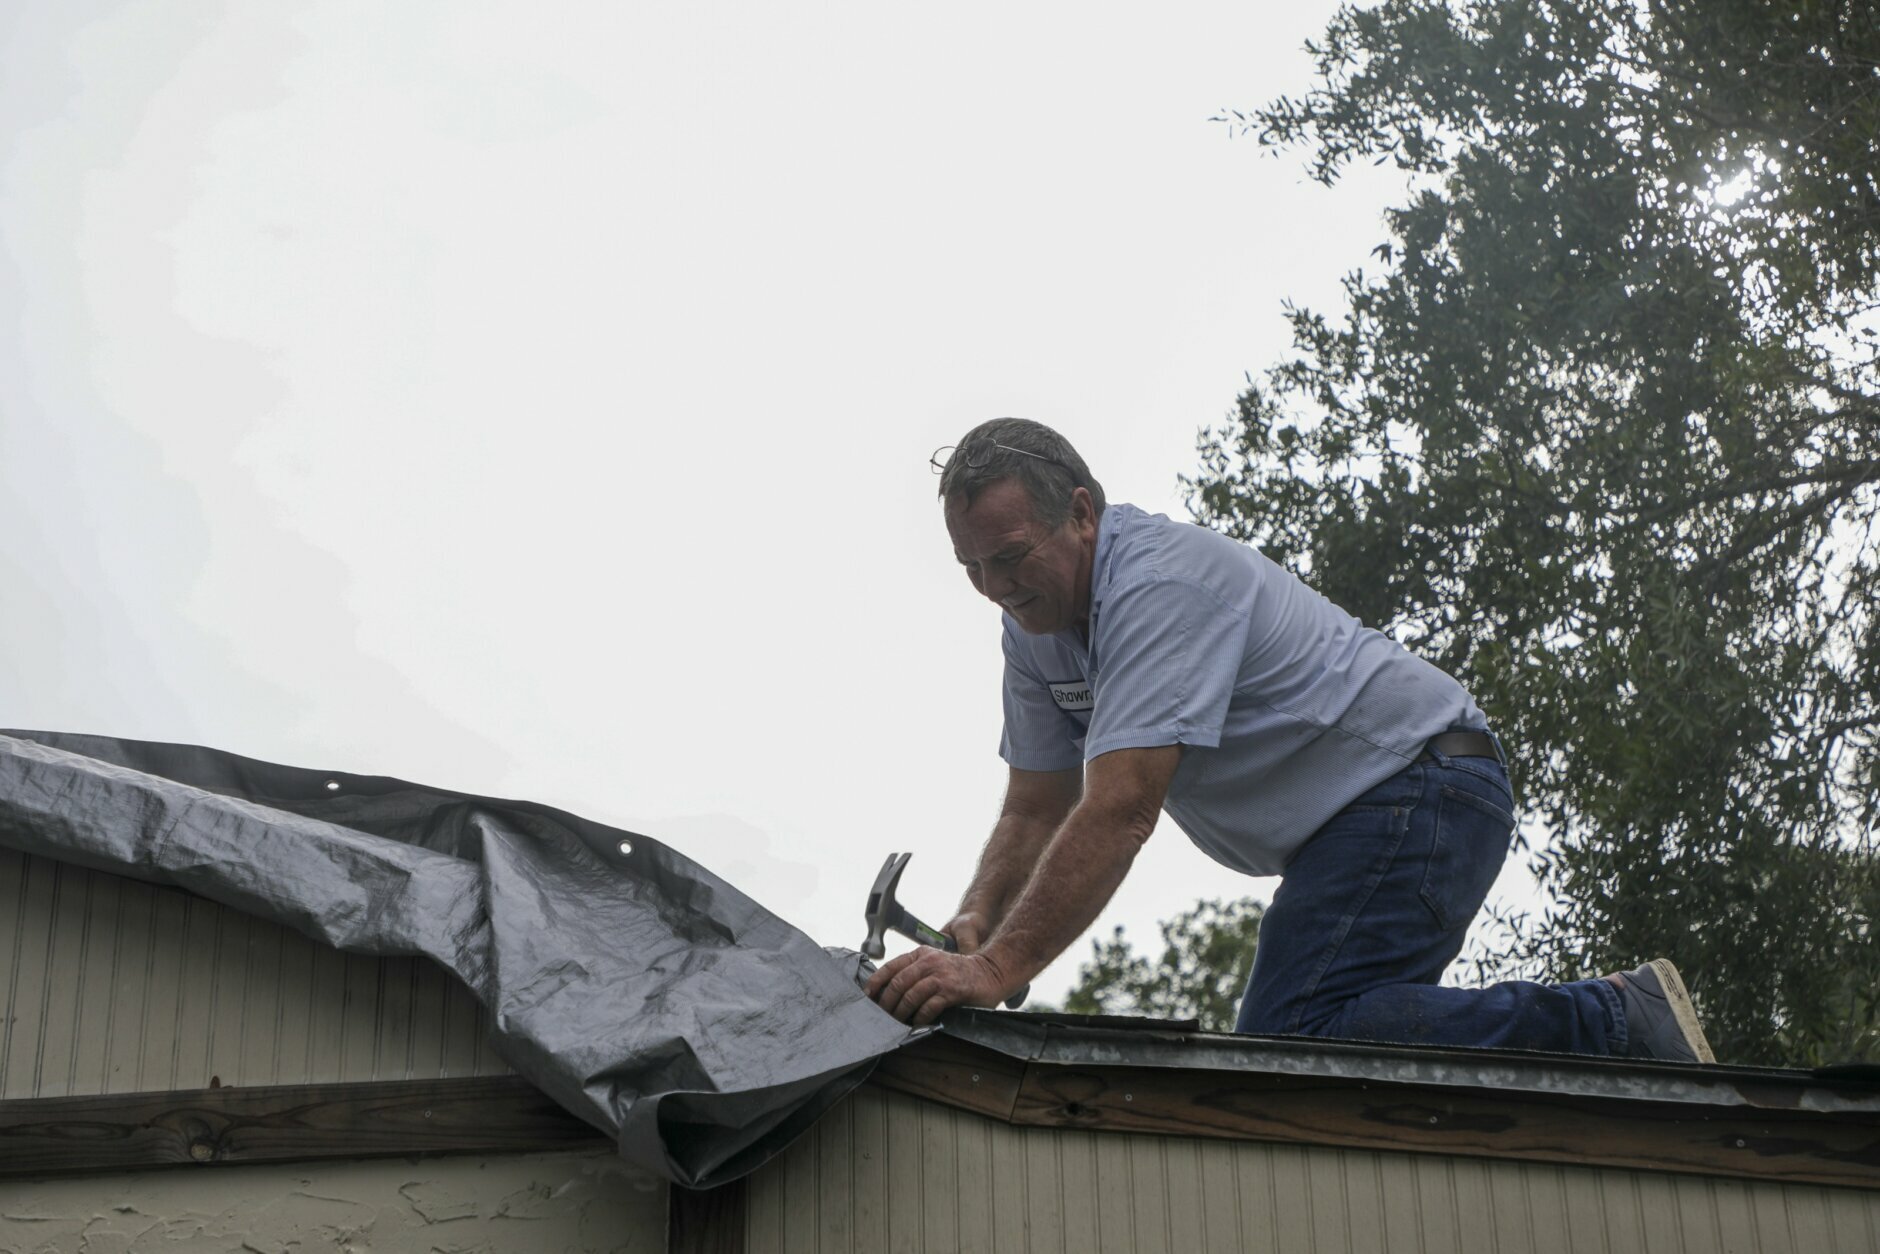 Shawn Frazier, 61, reinforces tarps over his Tampa home's roof ahead of Tropical Storm Elsa on Tuesday, July 6, 2021. Frazier said there was some leaking he caught during a recent rainy day. (Ivy Ceballo/Tampa Bay Times via AP)